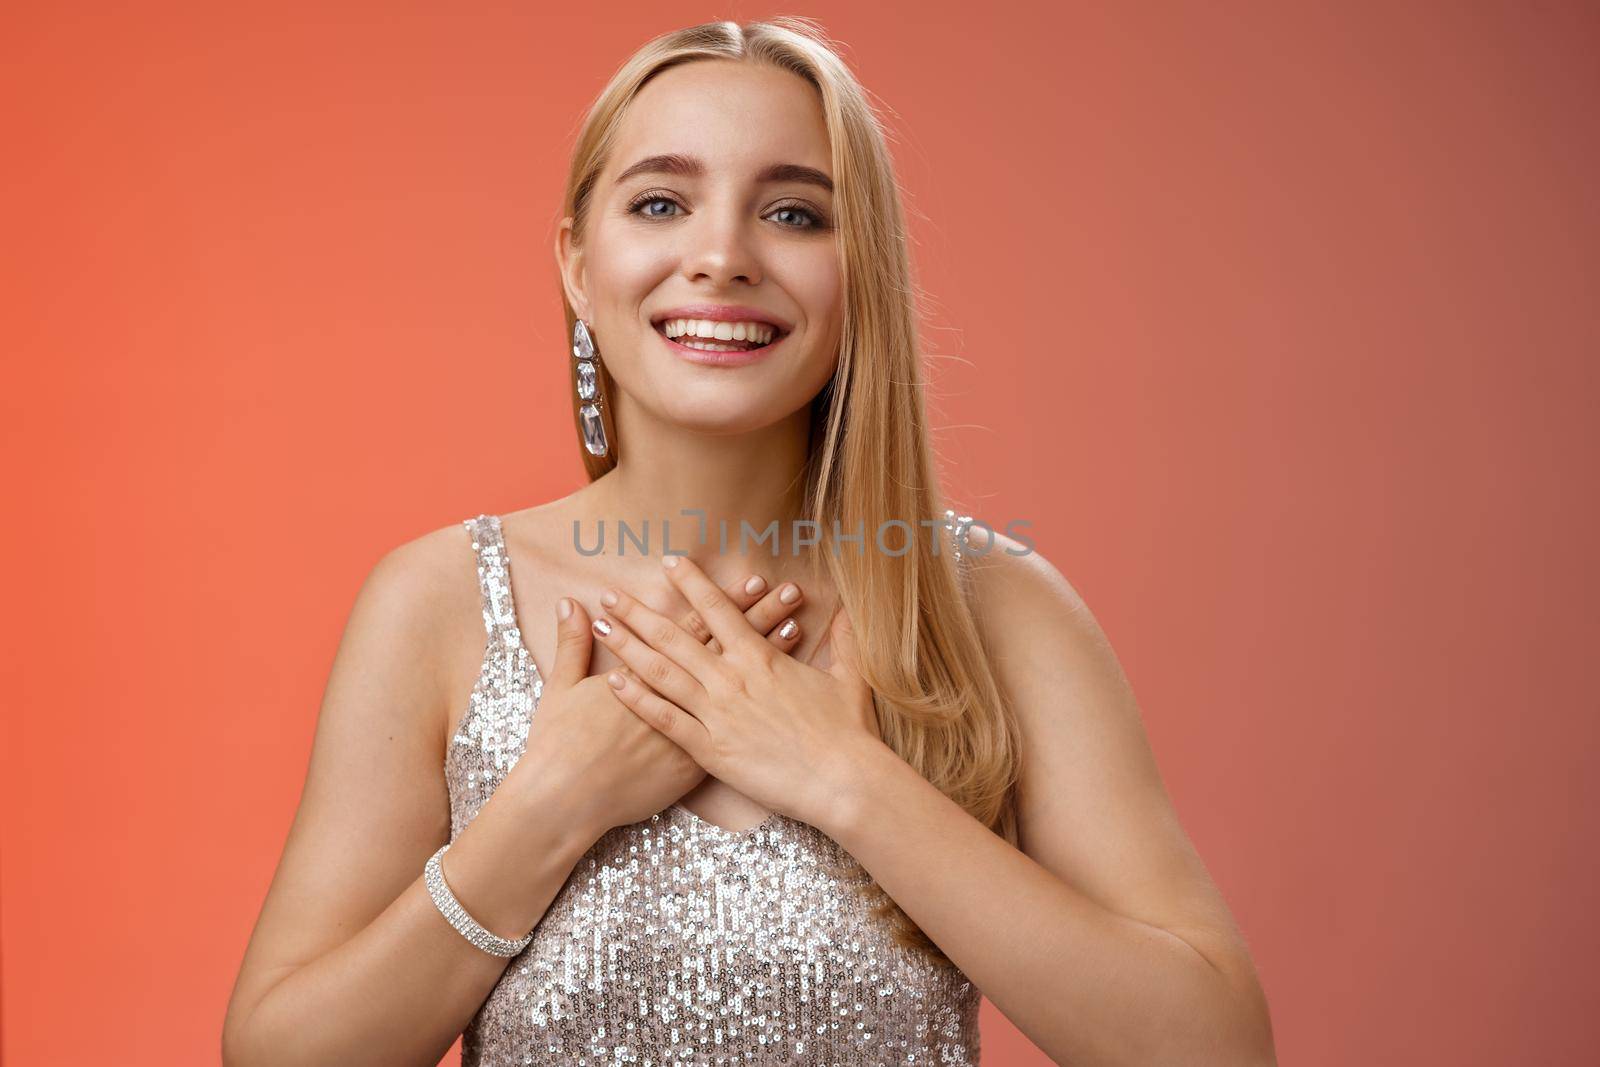 Grateful charming blond european 25s woman in silver party dress press palms heart feel thankful appreciate effort cherish romantic gesture receive flattering compliments gifts, smiling happily by Benzoix